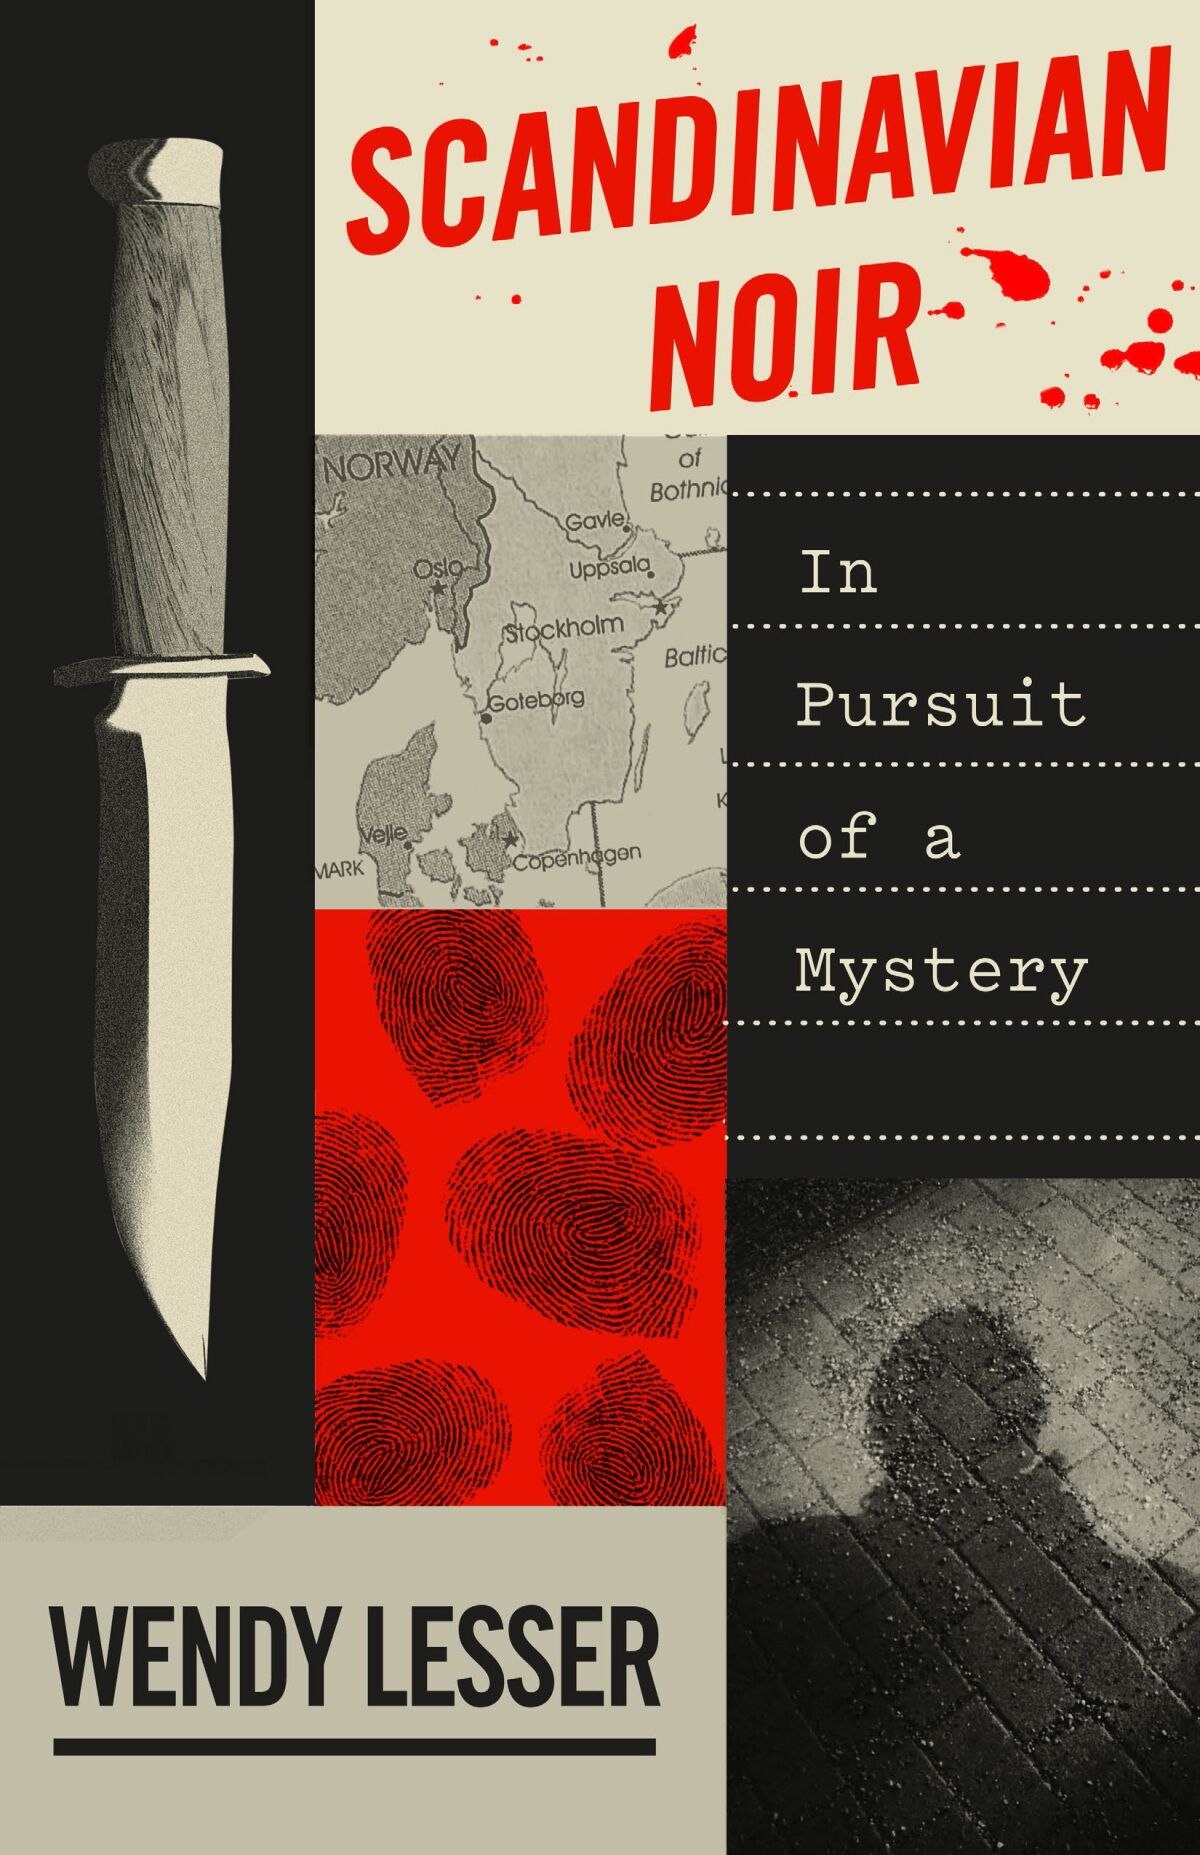 A book cover for Wendy Lesser's "Scandinavian Noir: In Pursuit of a Mystery."